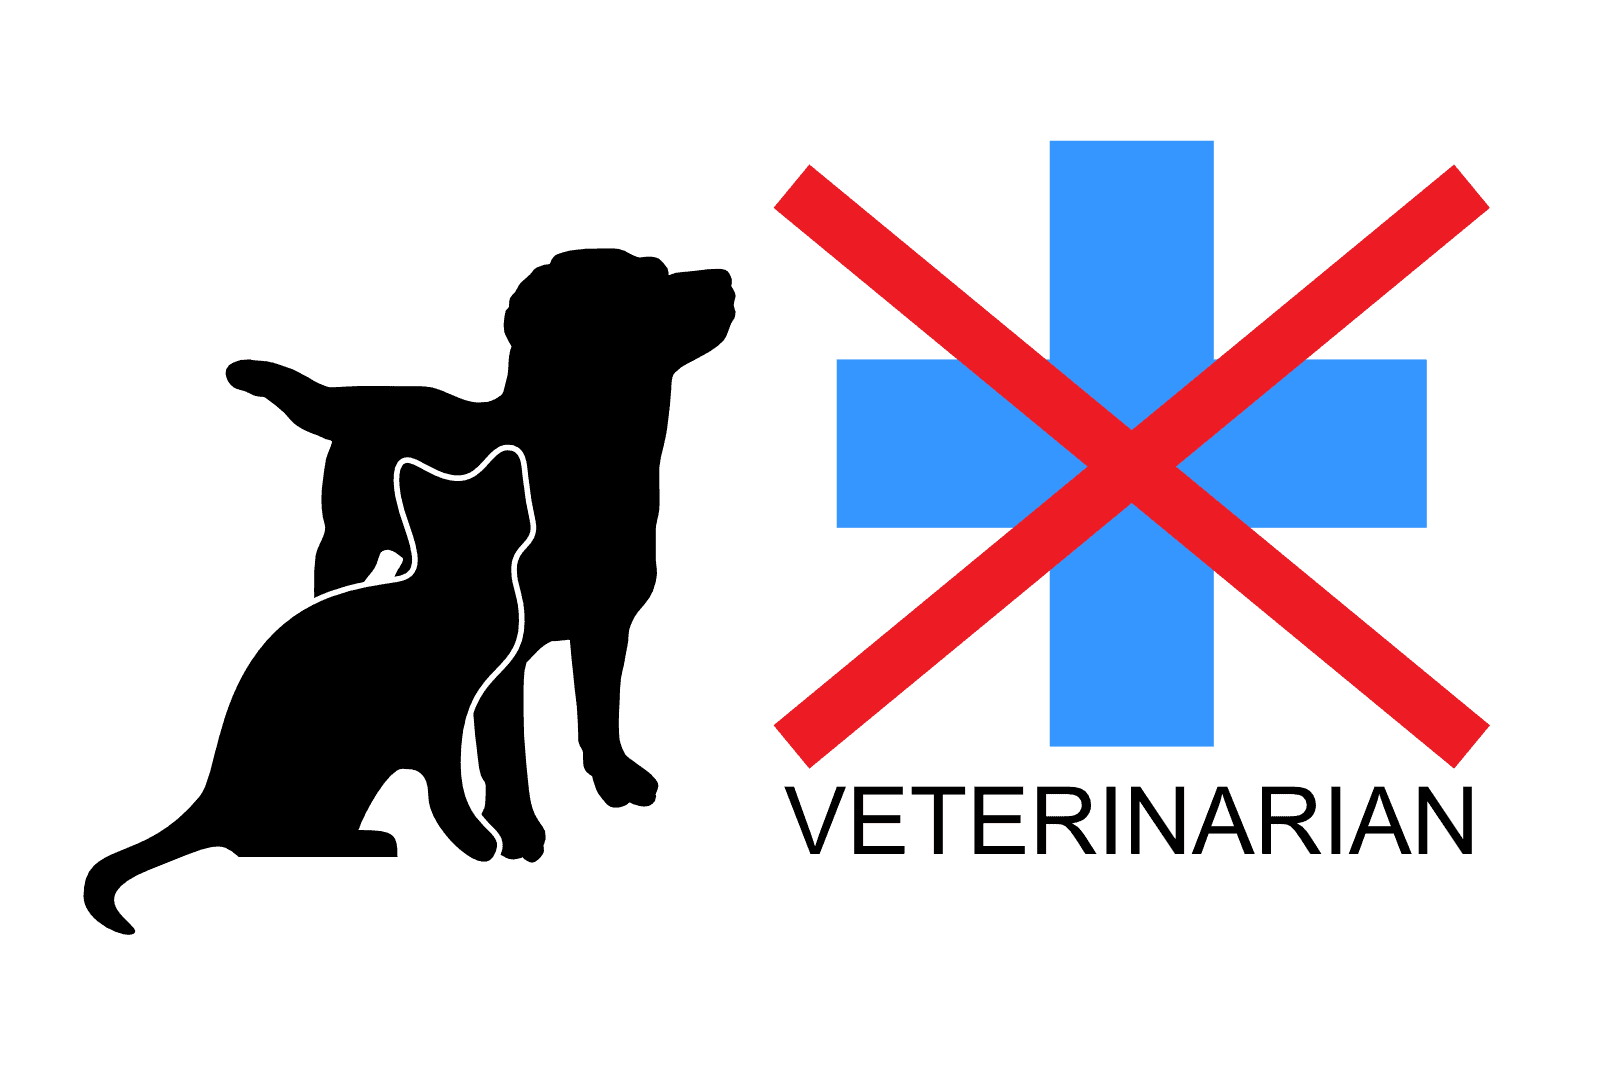 veterinarian symbol cat dog silhouette crossed out